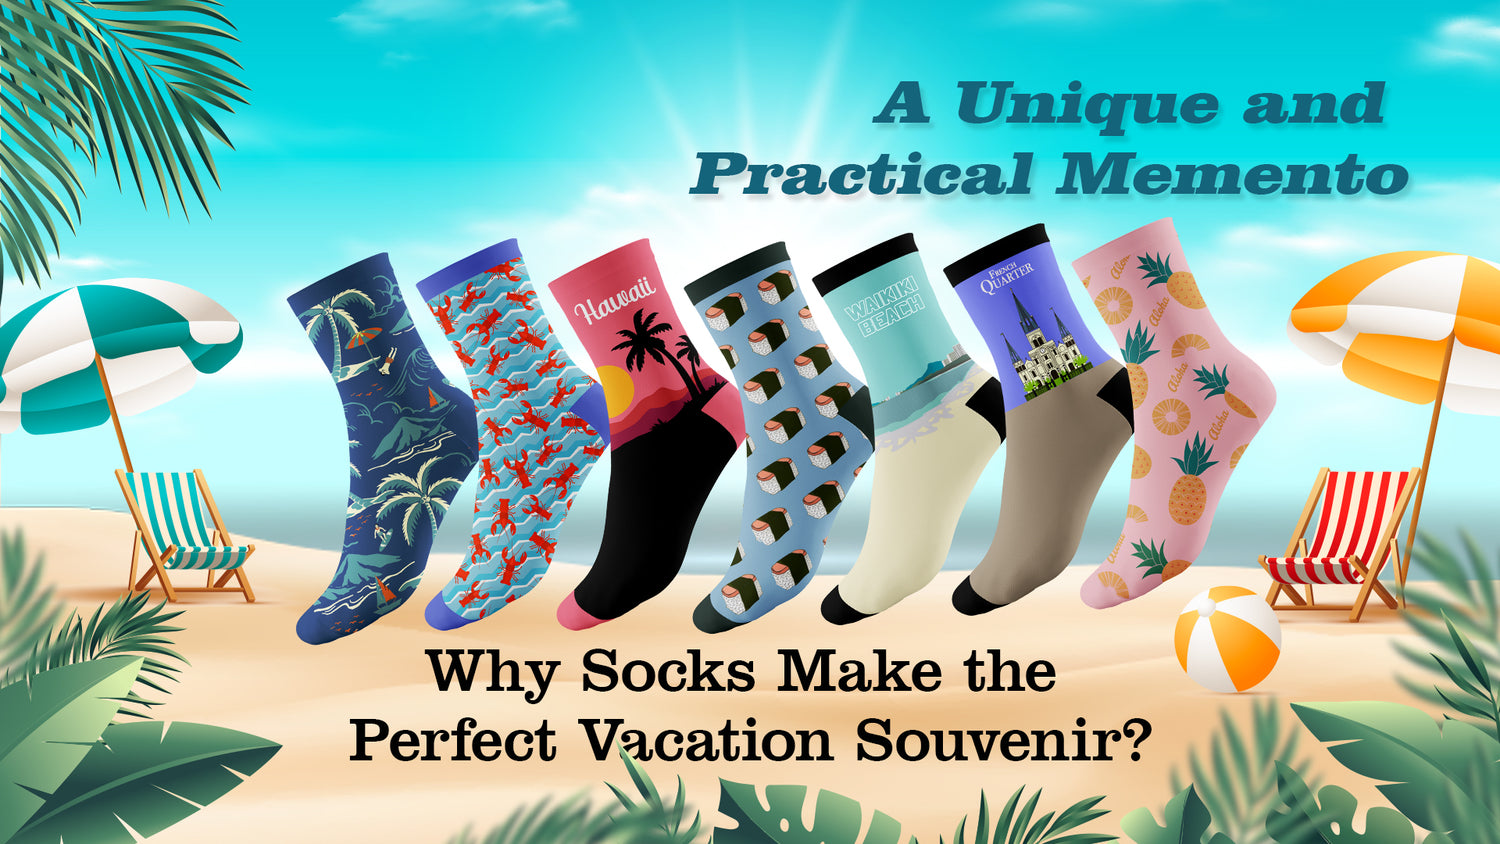 Why Socks Make the Perfect Vacation Souvenir: A Unique and Practical Memento